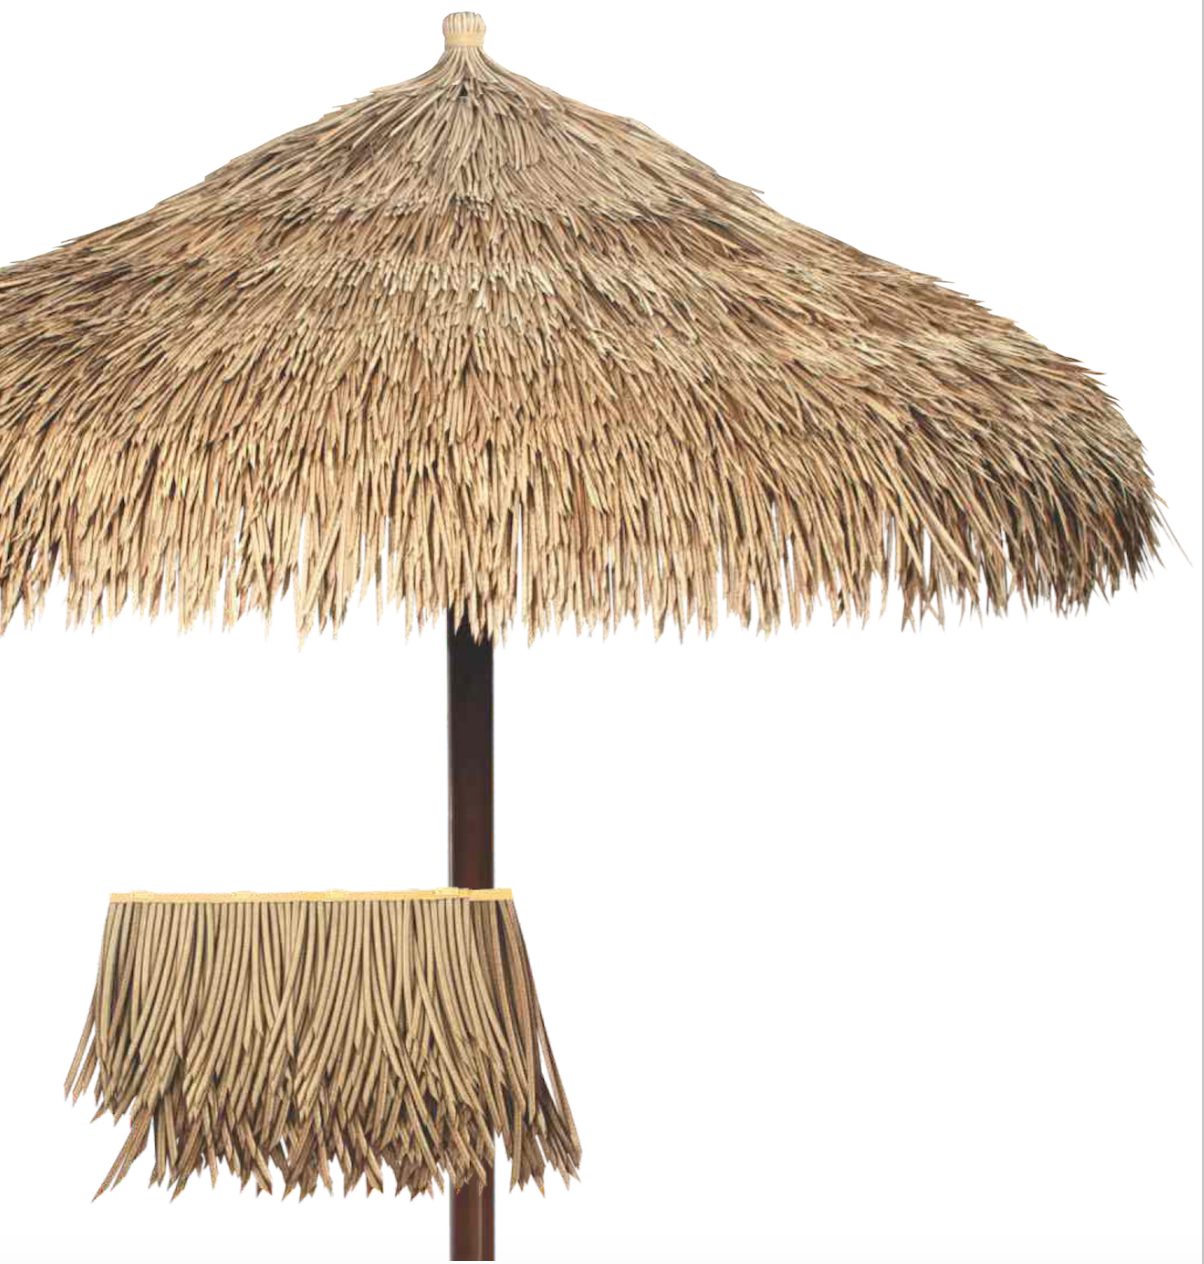 Synthetic Thatch Java Umbrellas Suitable For Resorts